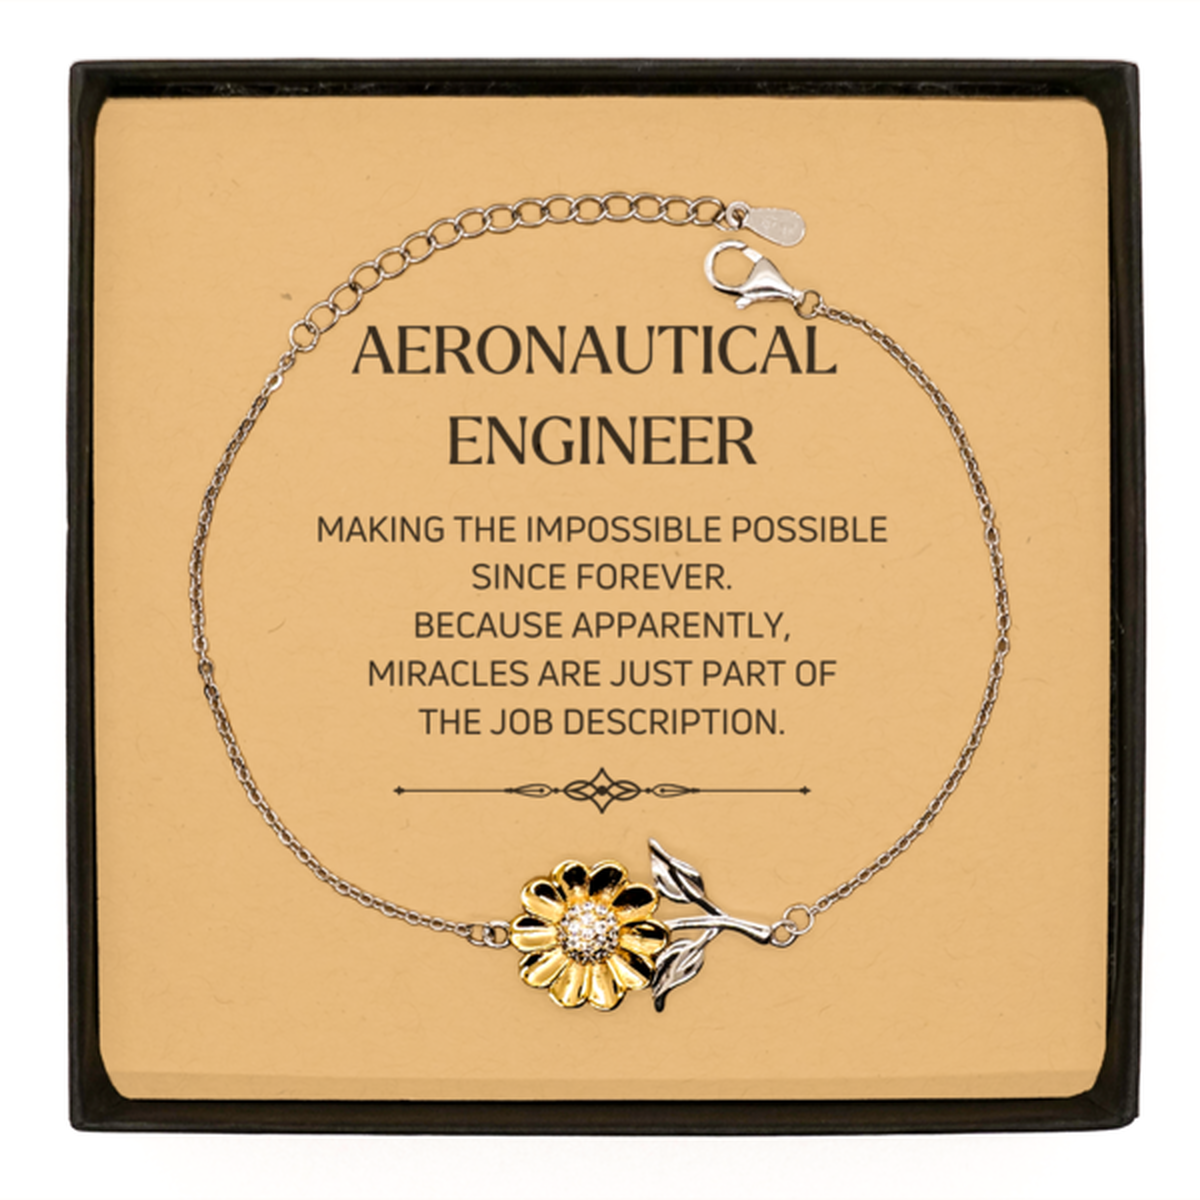 Funny Aeronautical Engineer Gifts, Miracles are just part of the job description, Inspirational Birthday Sunflower Bracelet For Aeronautical Engineer, Men, Women, Coworkers, Friends, Boss